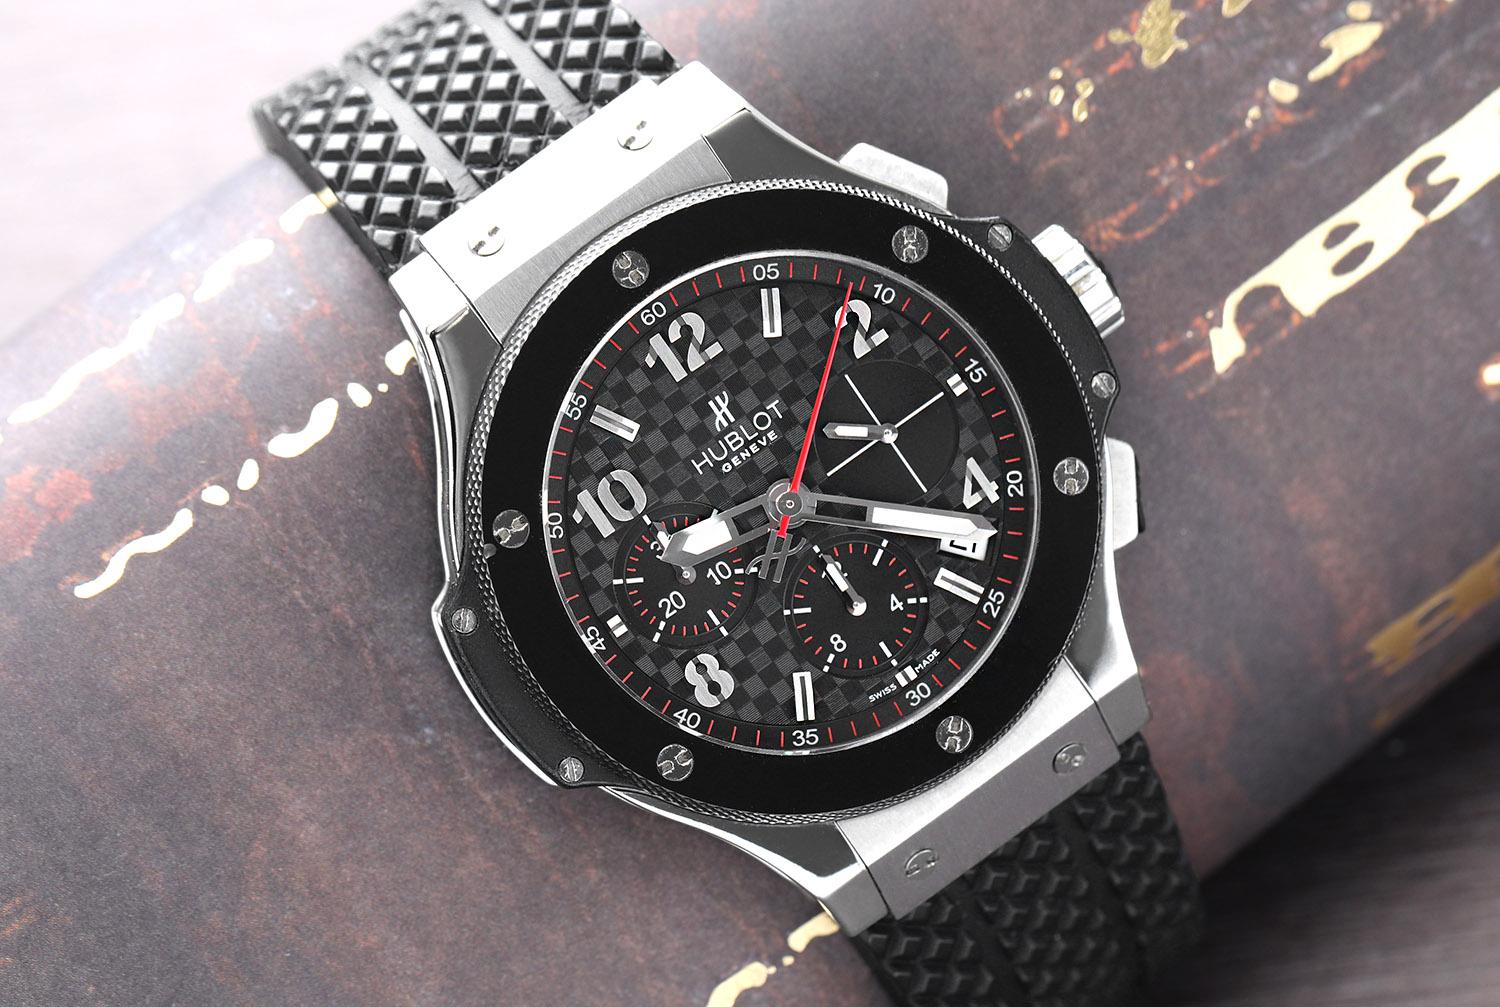 Watch comes with box, papers and appraisal certificate. It is covered by our in-house 1 year mechanical warranty. Stainless steel case with a black rubber strap. Fixed black ceramic bezel (has a little chip, see images). Black carbon fiber dial with